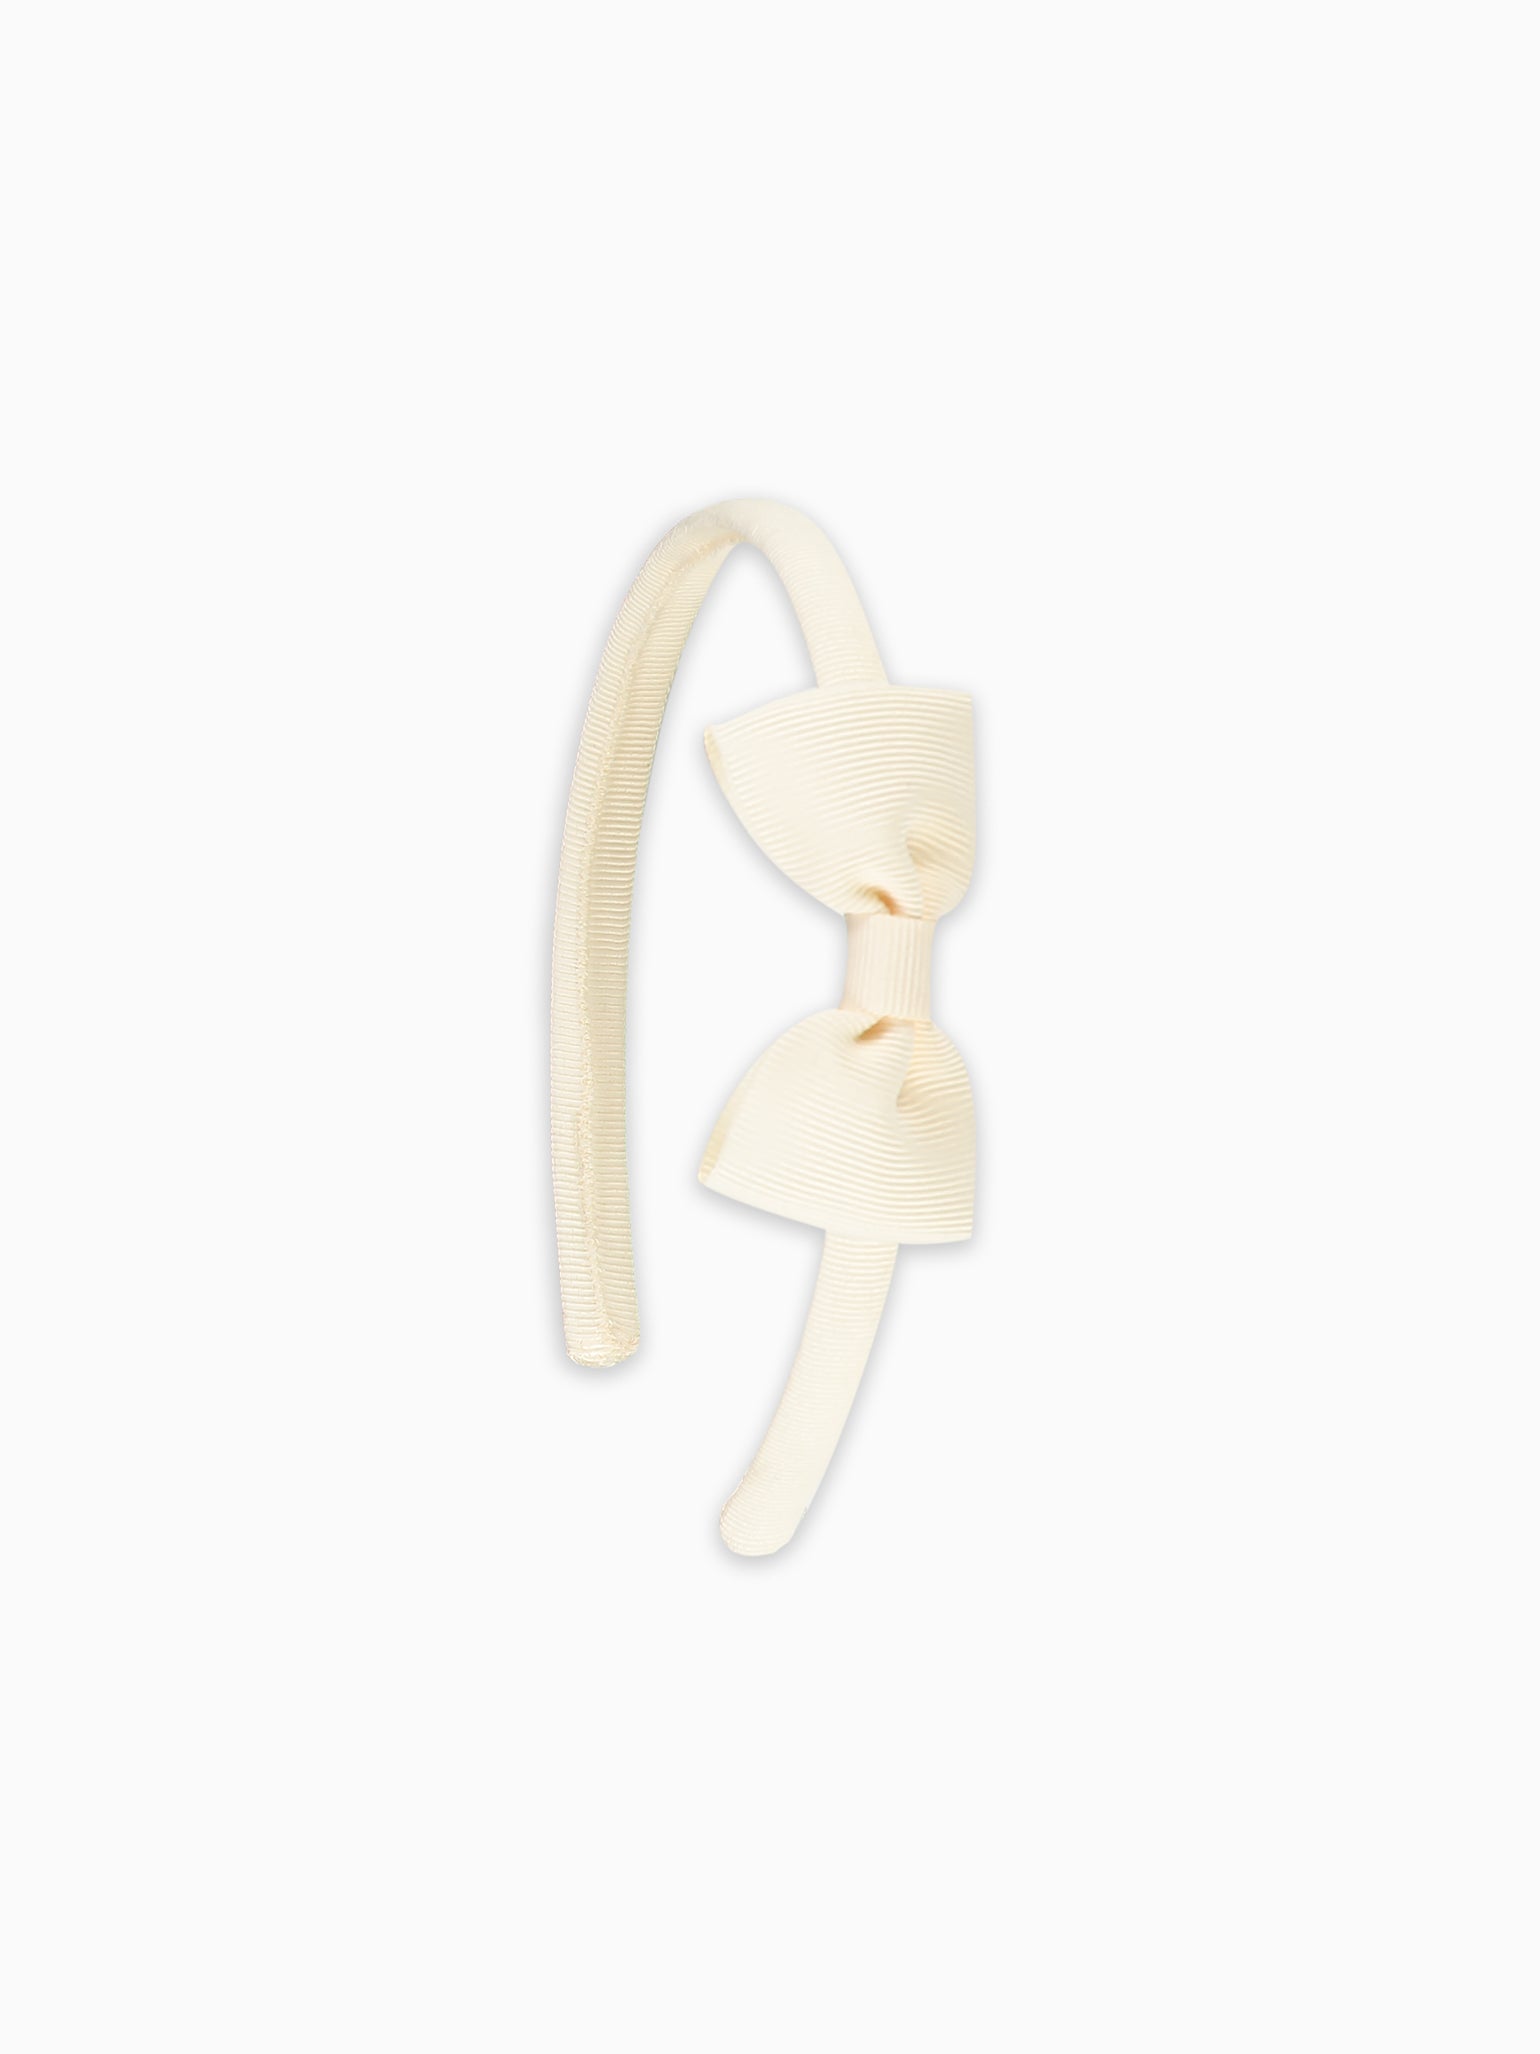 Off White Small Bow Girl Hairband